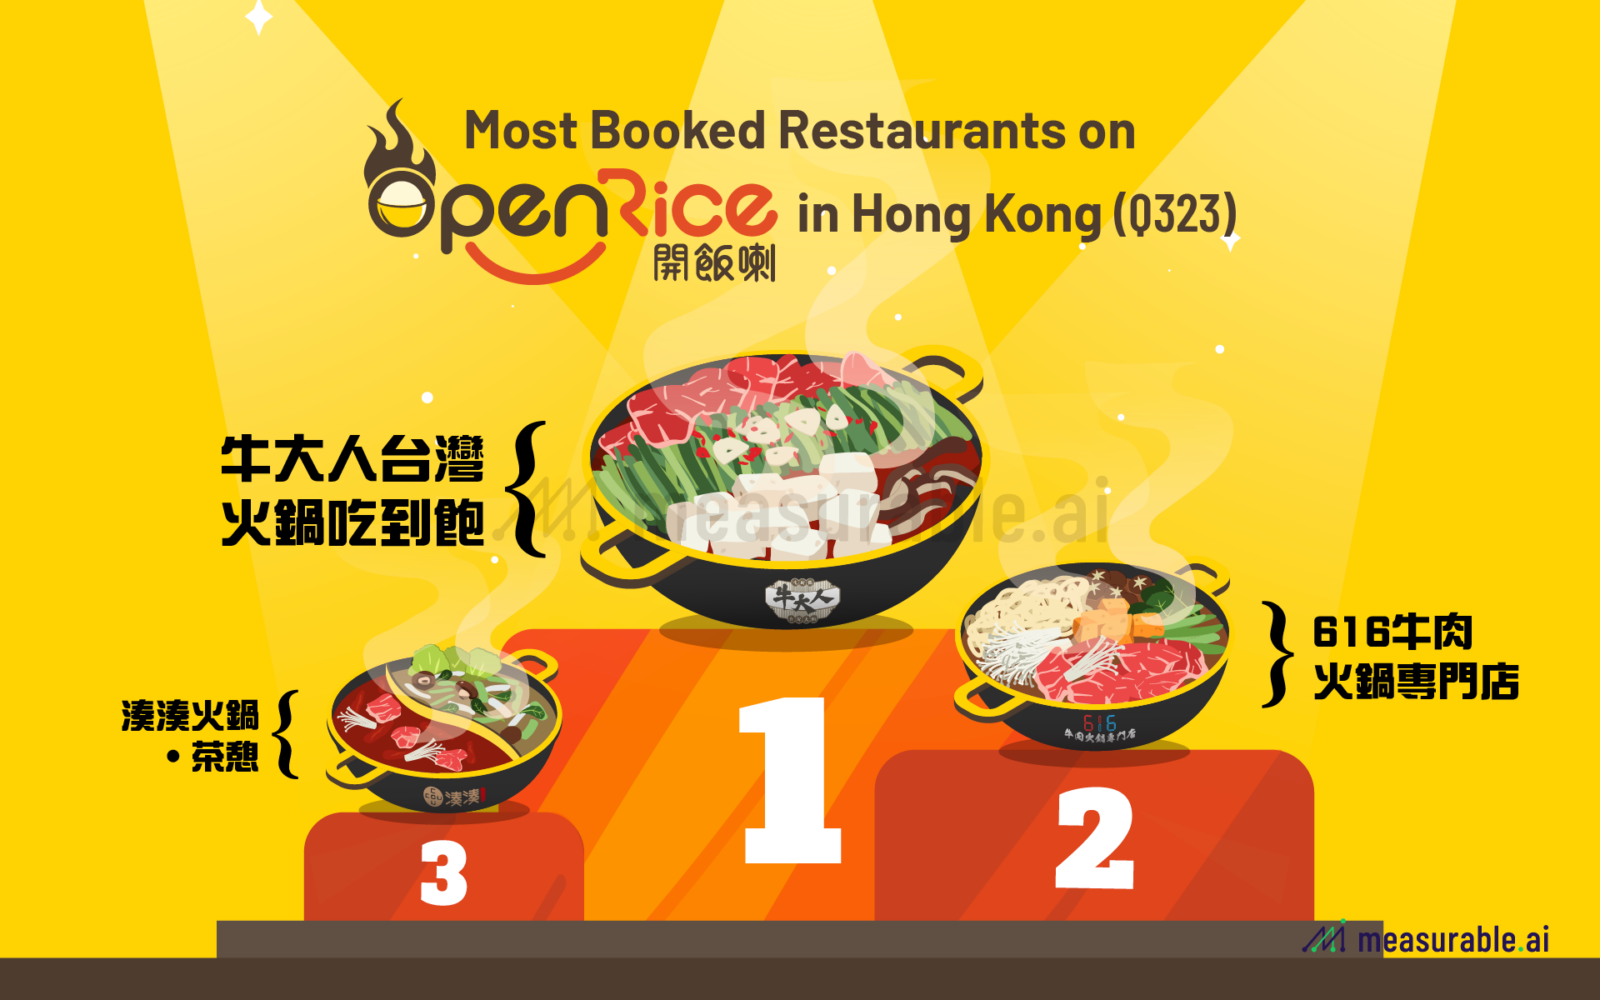 Most Booked Restaurants on OpenRice in Hong Kong (Q323)